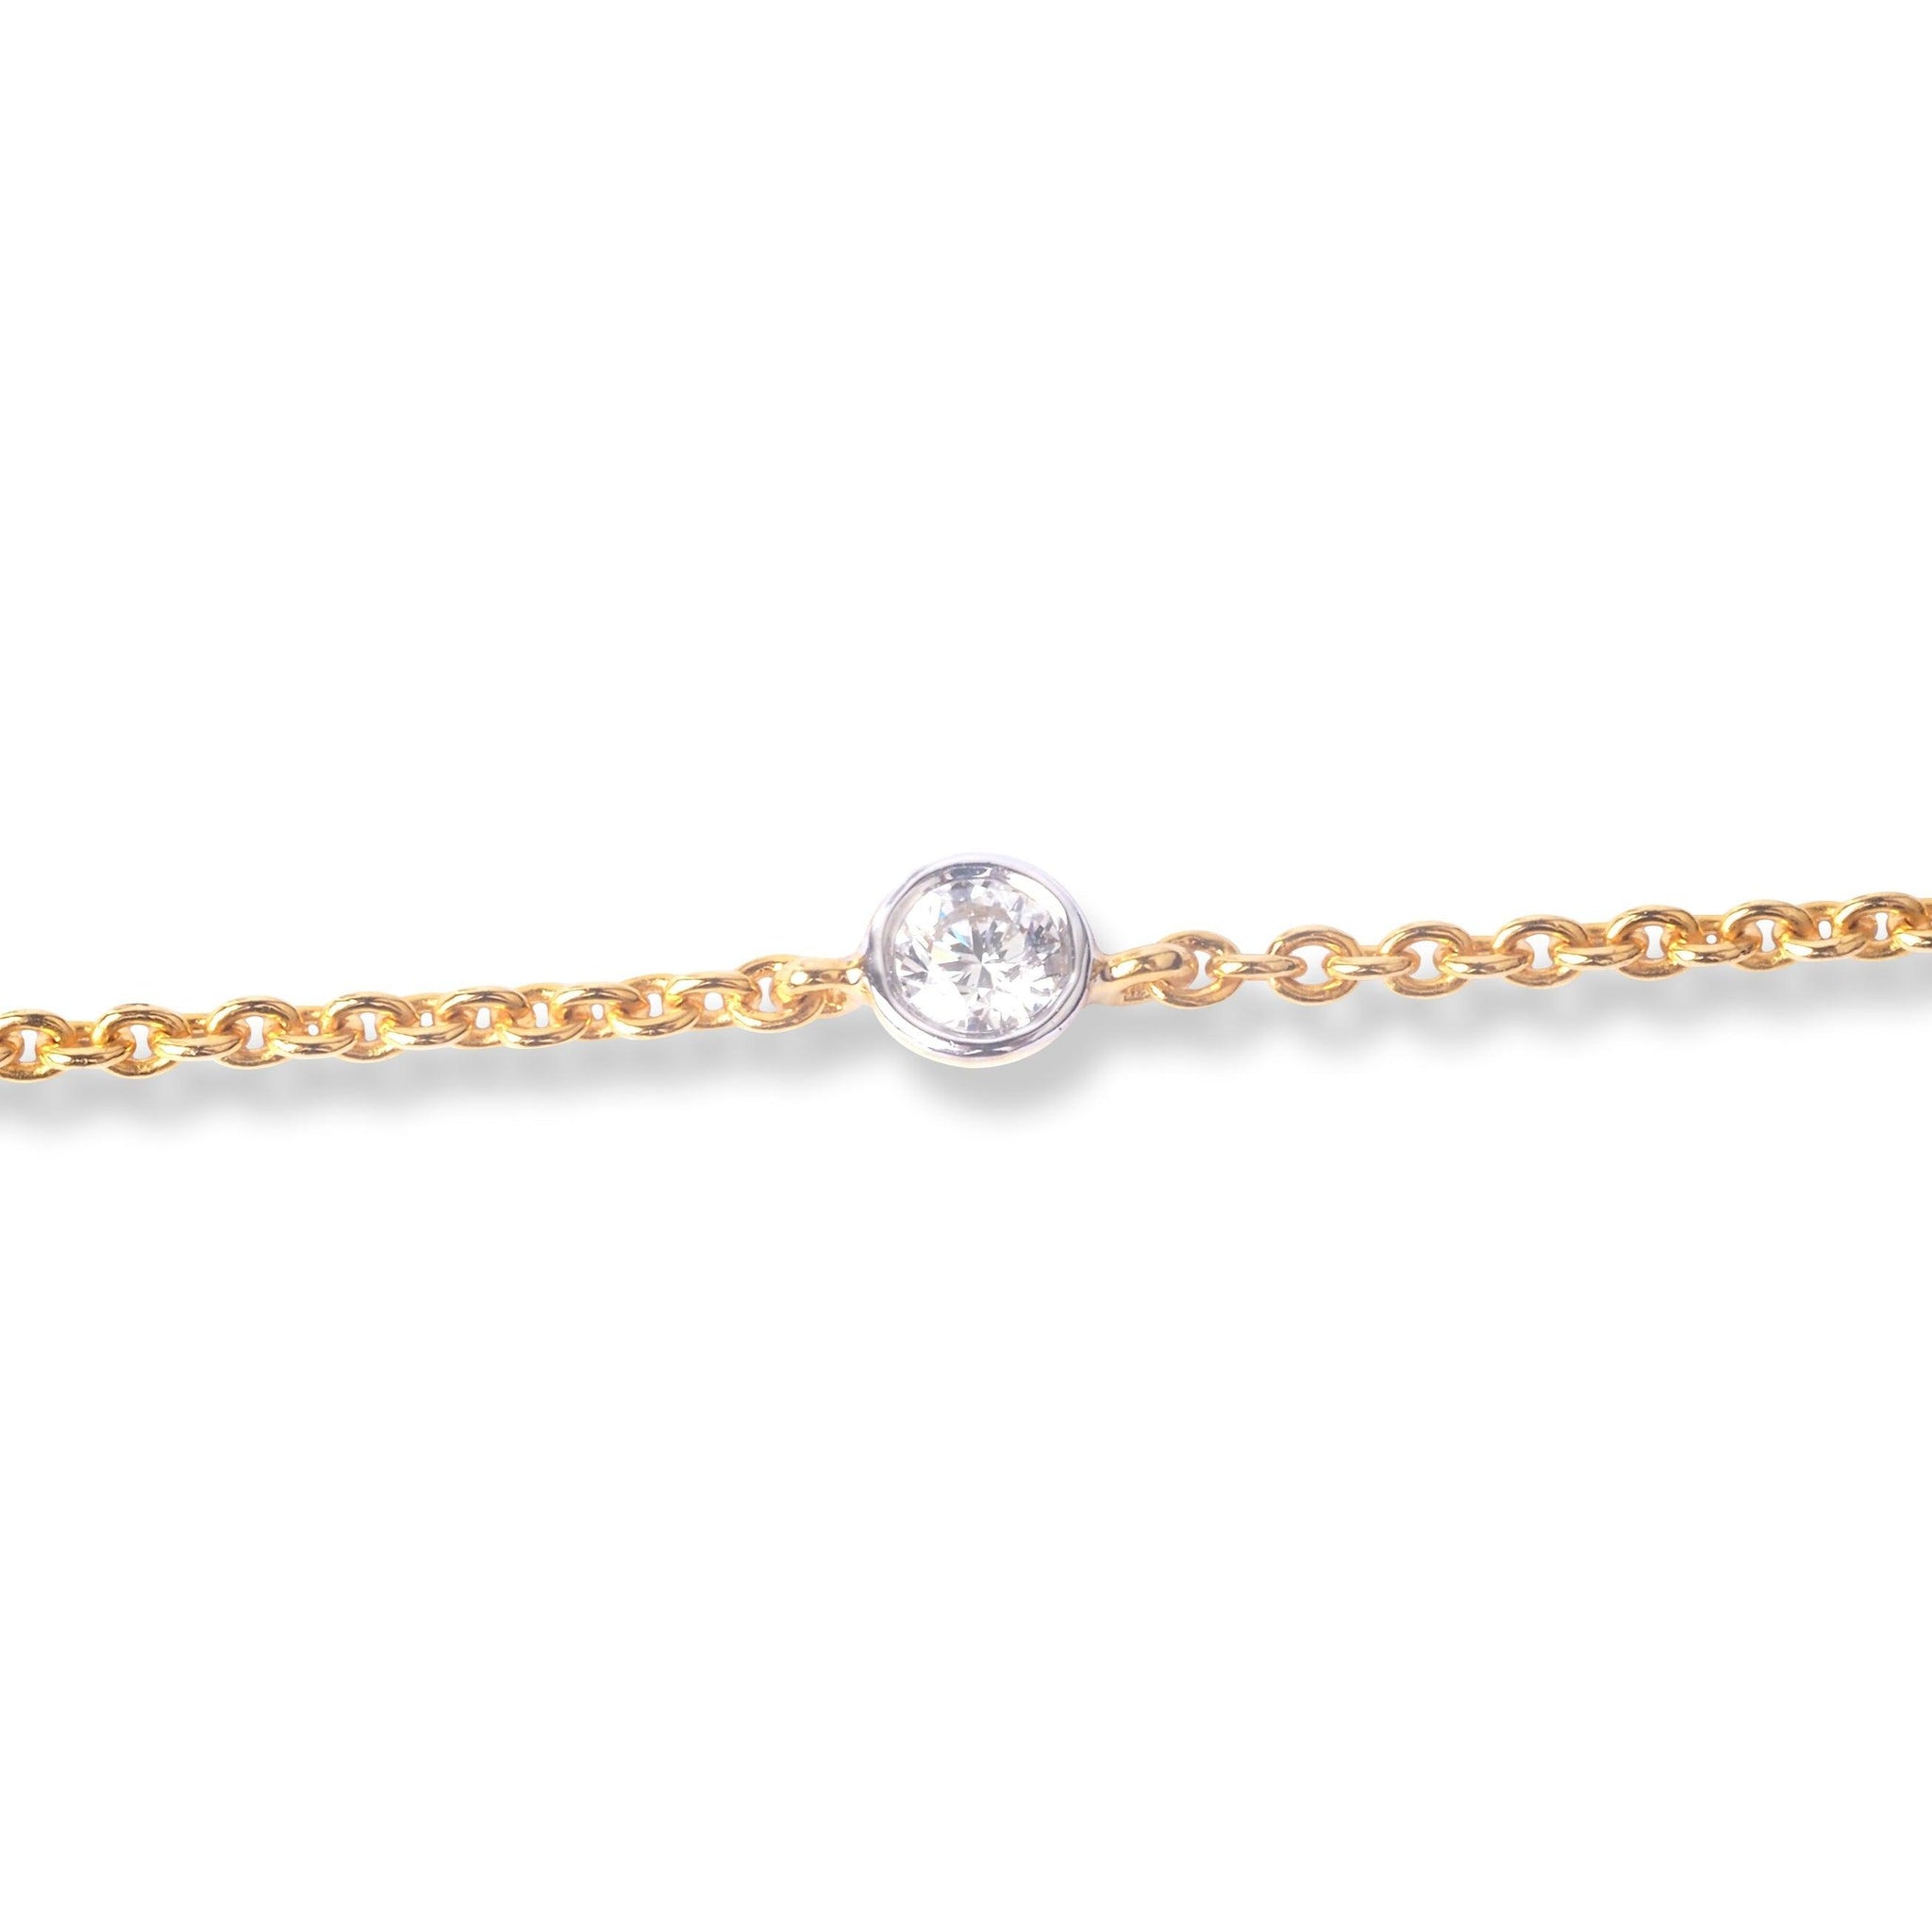 18ct Yellow Gold Solitaire Diamond Bracelet with Ring Clasp MCS6255